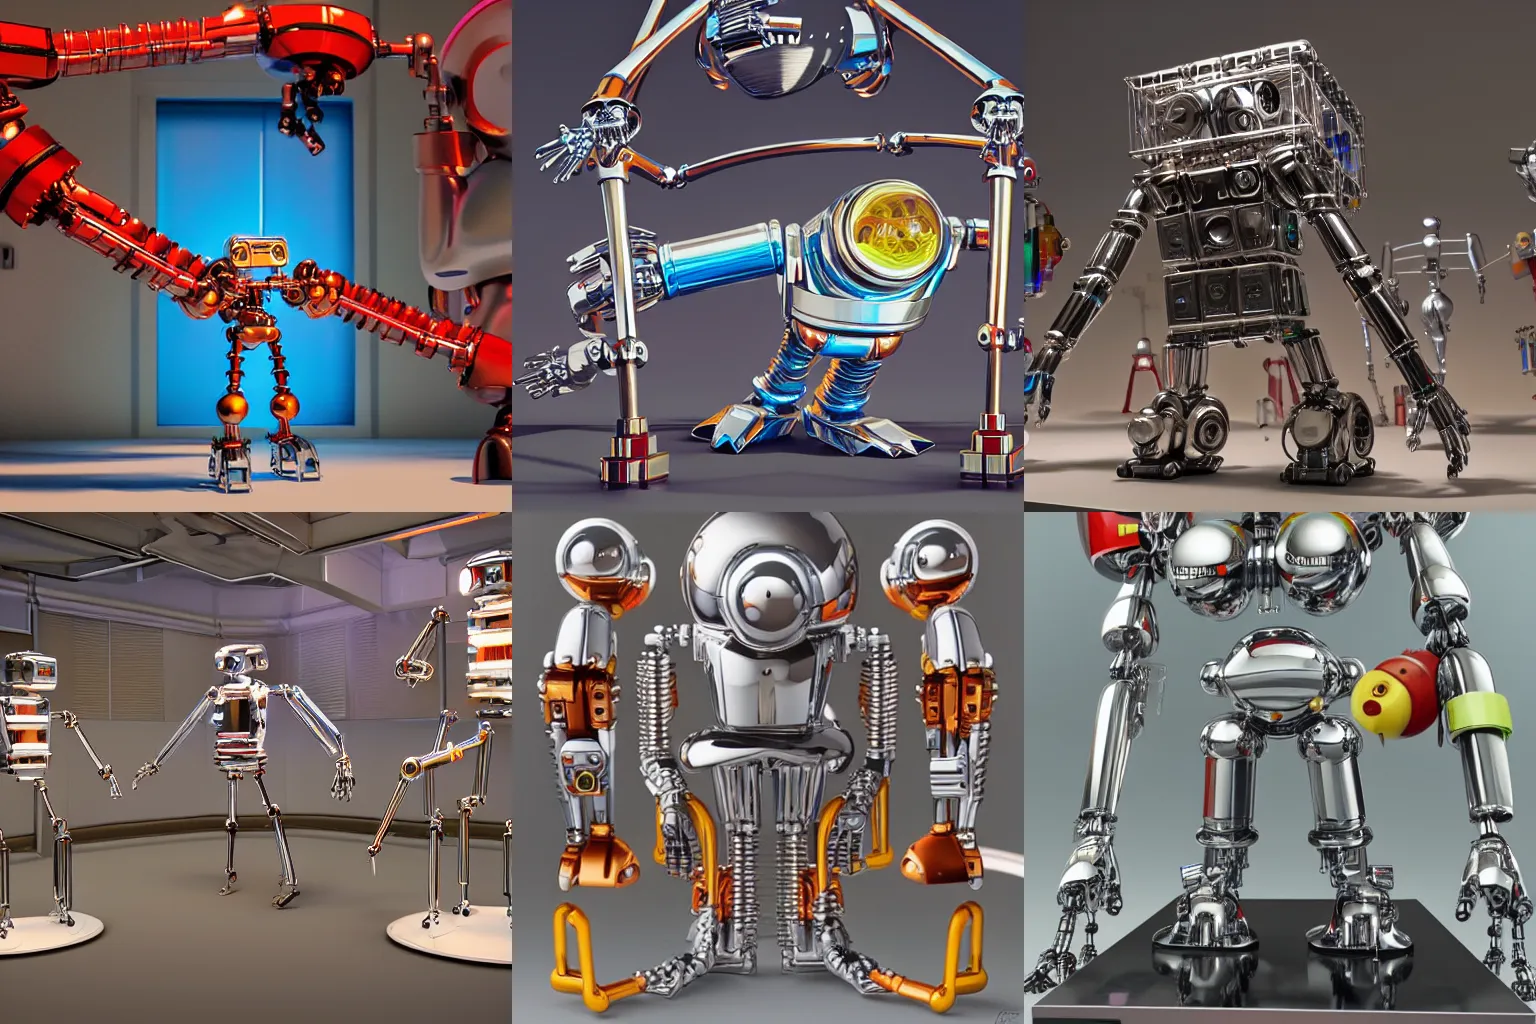 Prompt: A propaganda, chrome simple funny mechanical mechabot characterdesign toy sculpture made from chrome wires and tubes by moebius, by david lachapelle, by angus mckie, by rhads, by jeff koons, in an empty studio hollow, c4d